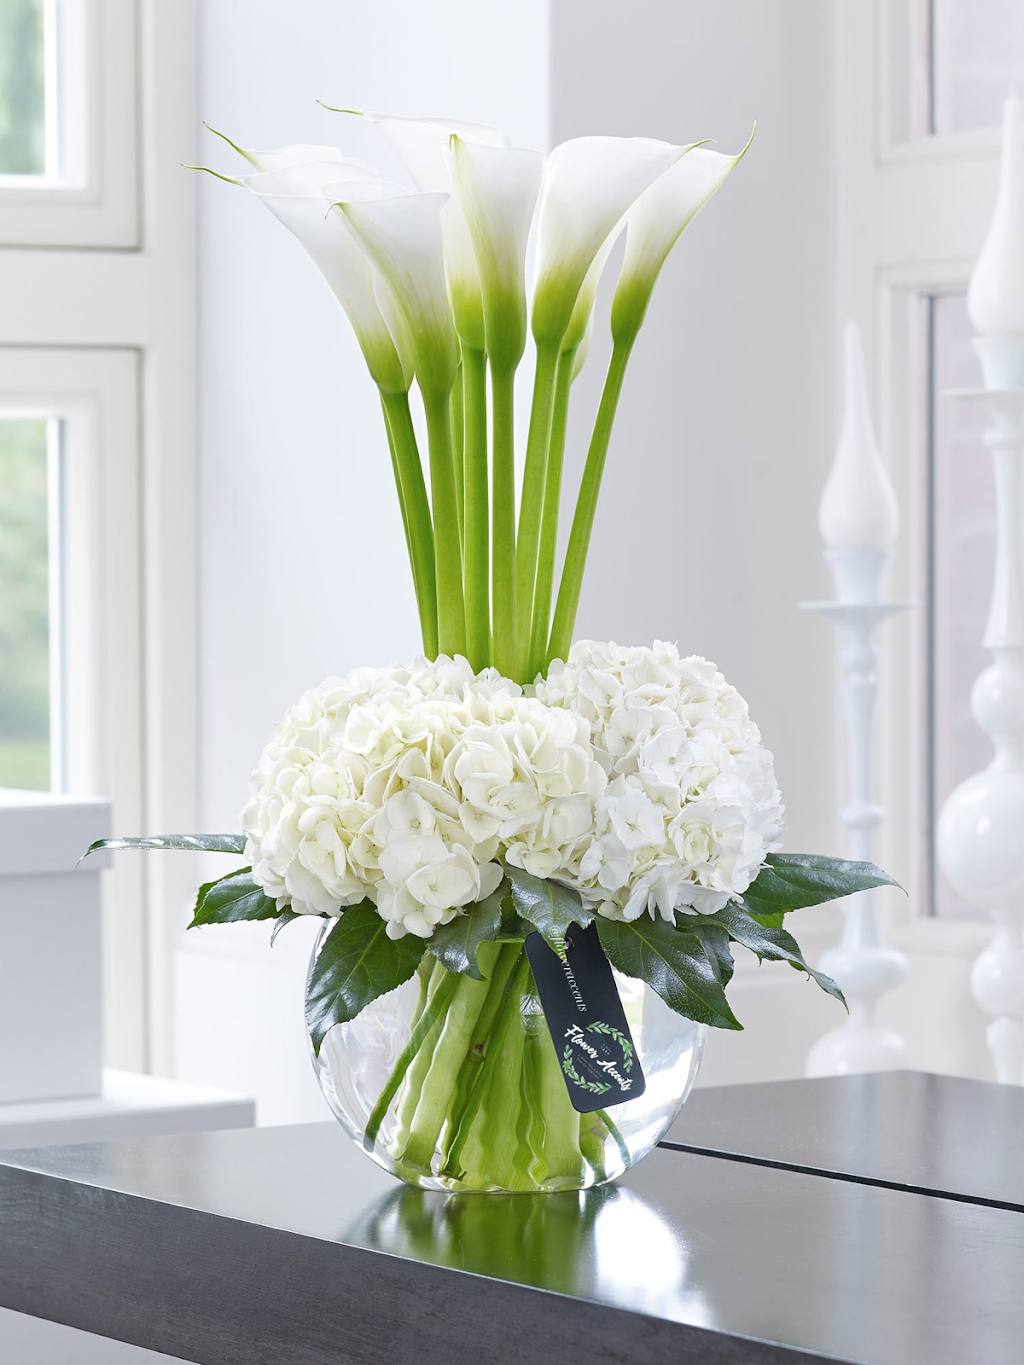 Flower Accents | 1800 Sheppard Ave E, North York, ON M2J 5A7, Canada | Phone: (416) 351-1111